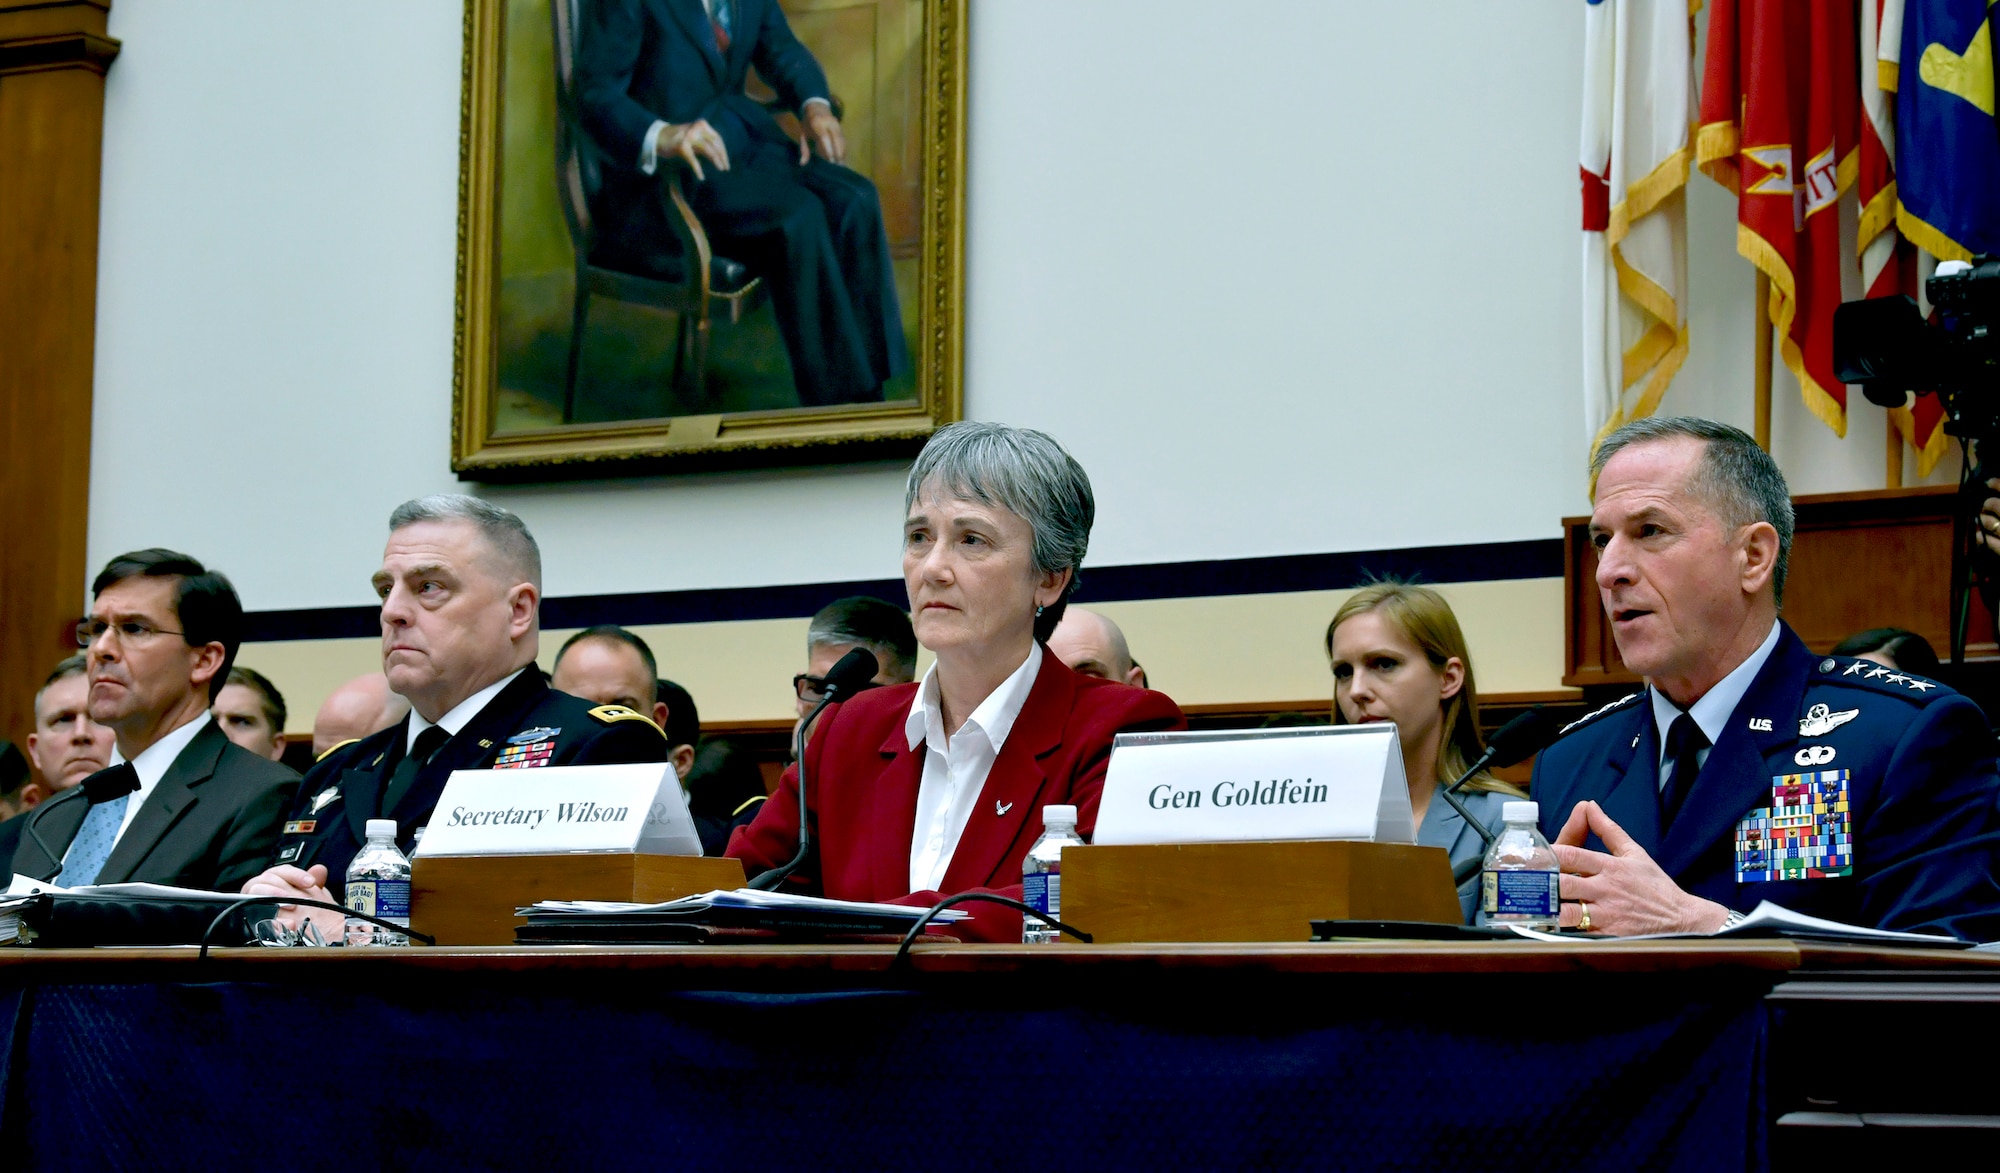 Secretary of the Air Force Heather Wilson and Air Force Chief of Staff Gen. David L. Goldfein testifies during a House Armed Services Committee hearing in Washington D.C., April 2, 2019. The committee convened to discuss fiscal year 2020 budget requests with the Air Force and Army senior leaders. (U.S. Air Force Photo by Wayne Clark)